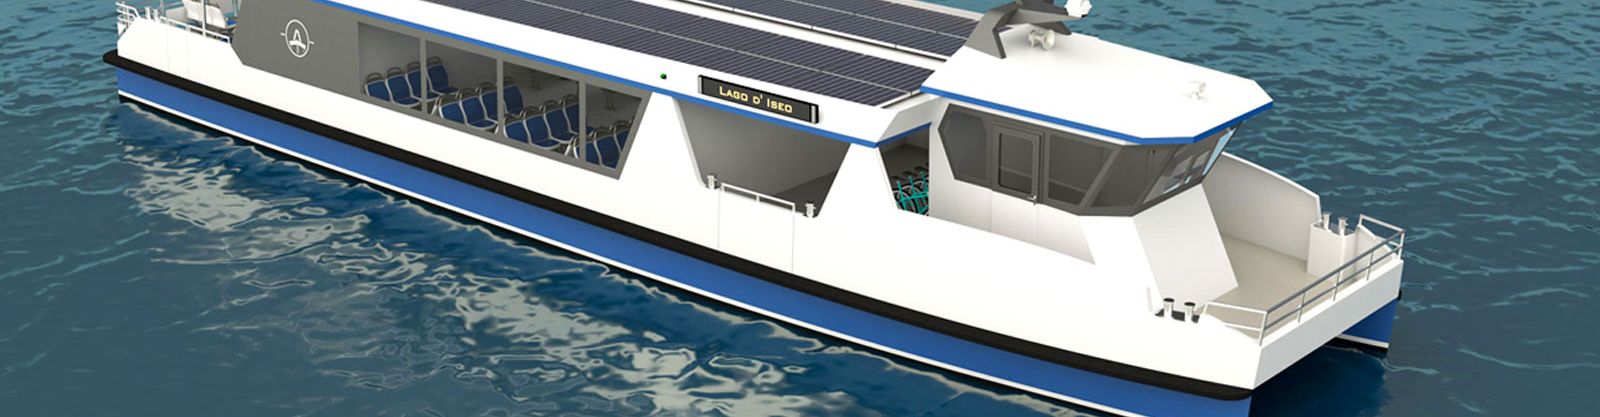 Let there be CUBES! We are thrilled to have been chosen as battery provider for two solar ferries built by Ampereship theemission free division of Stralsund-based Ostseestaal GmbH & Co. KG.